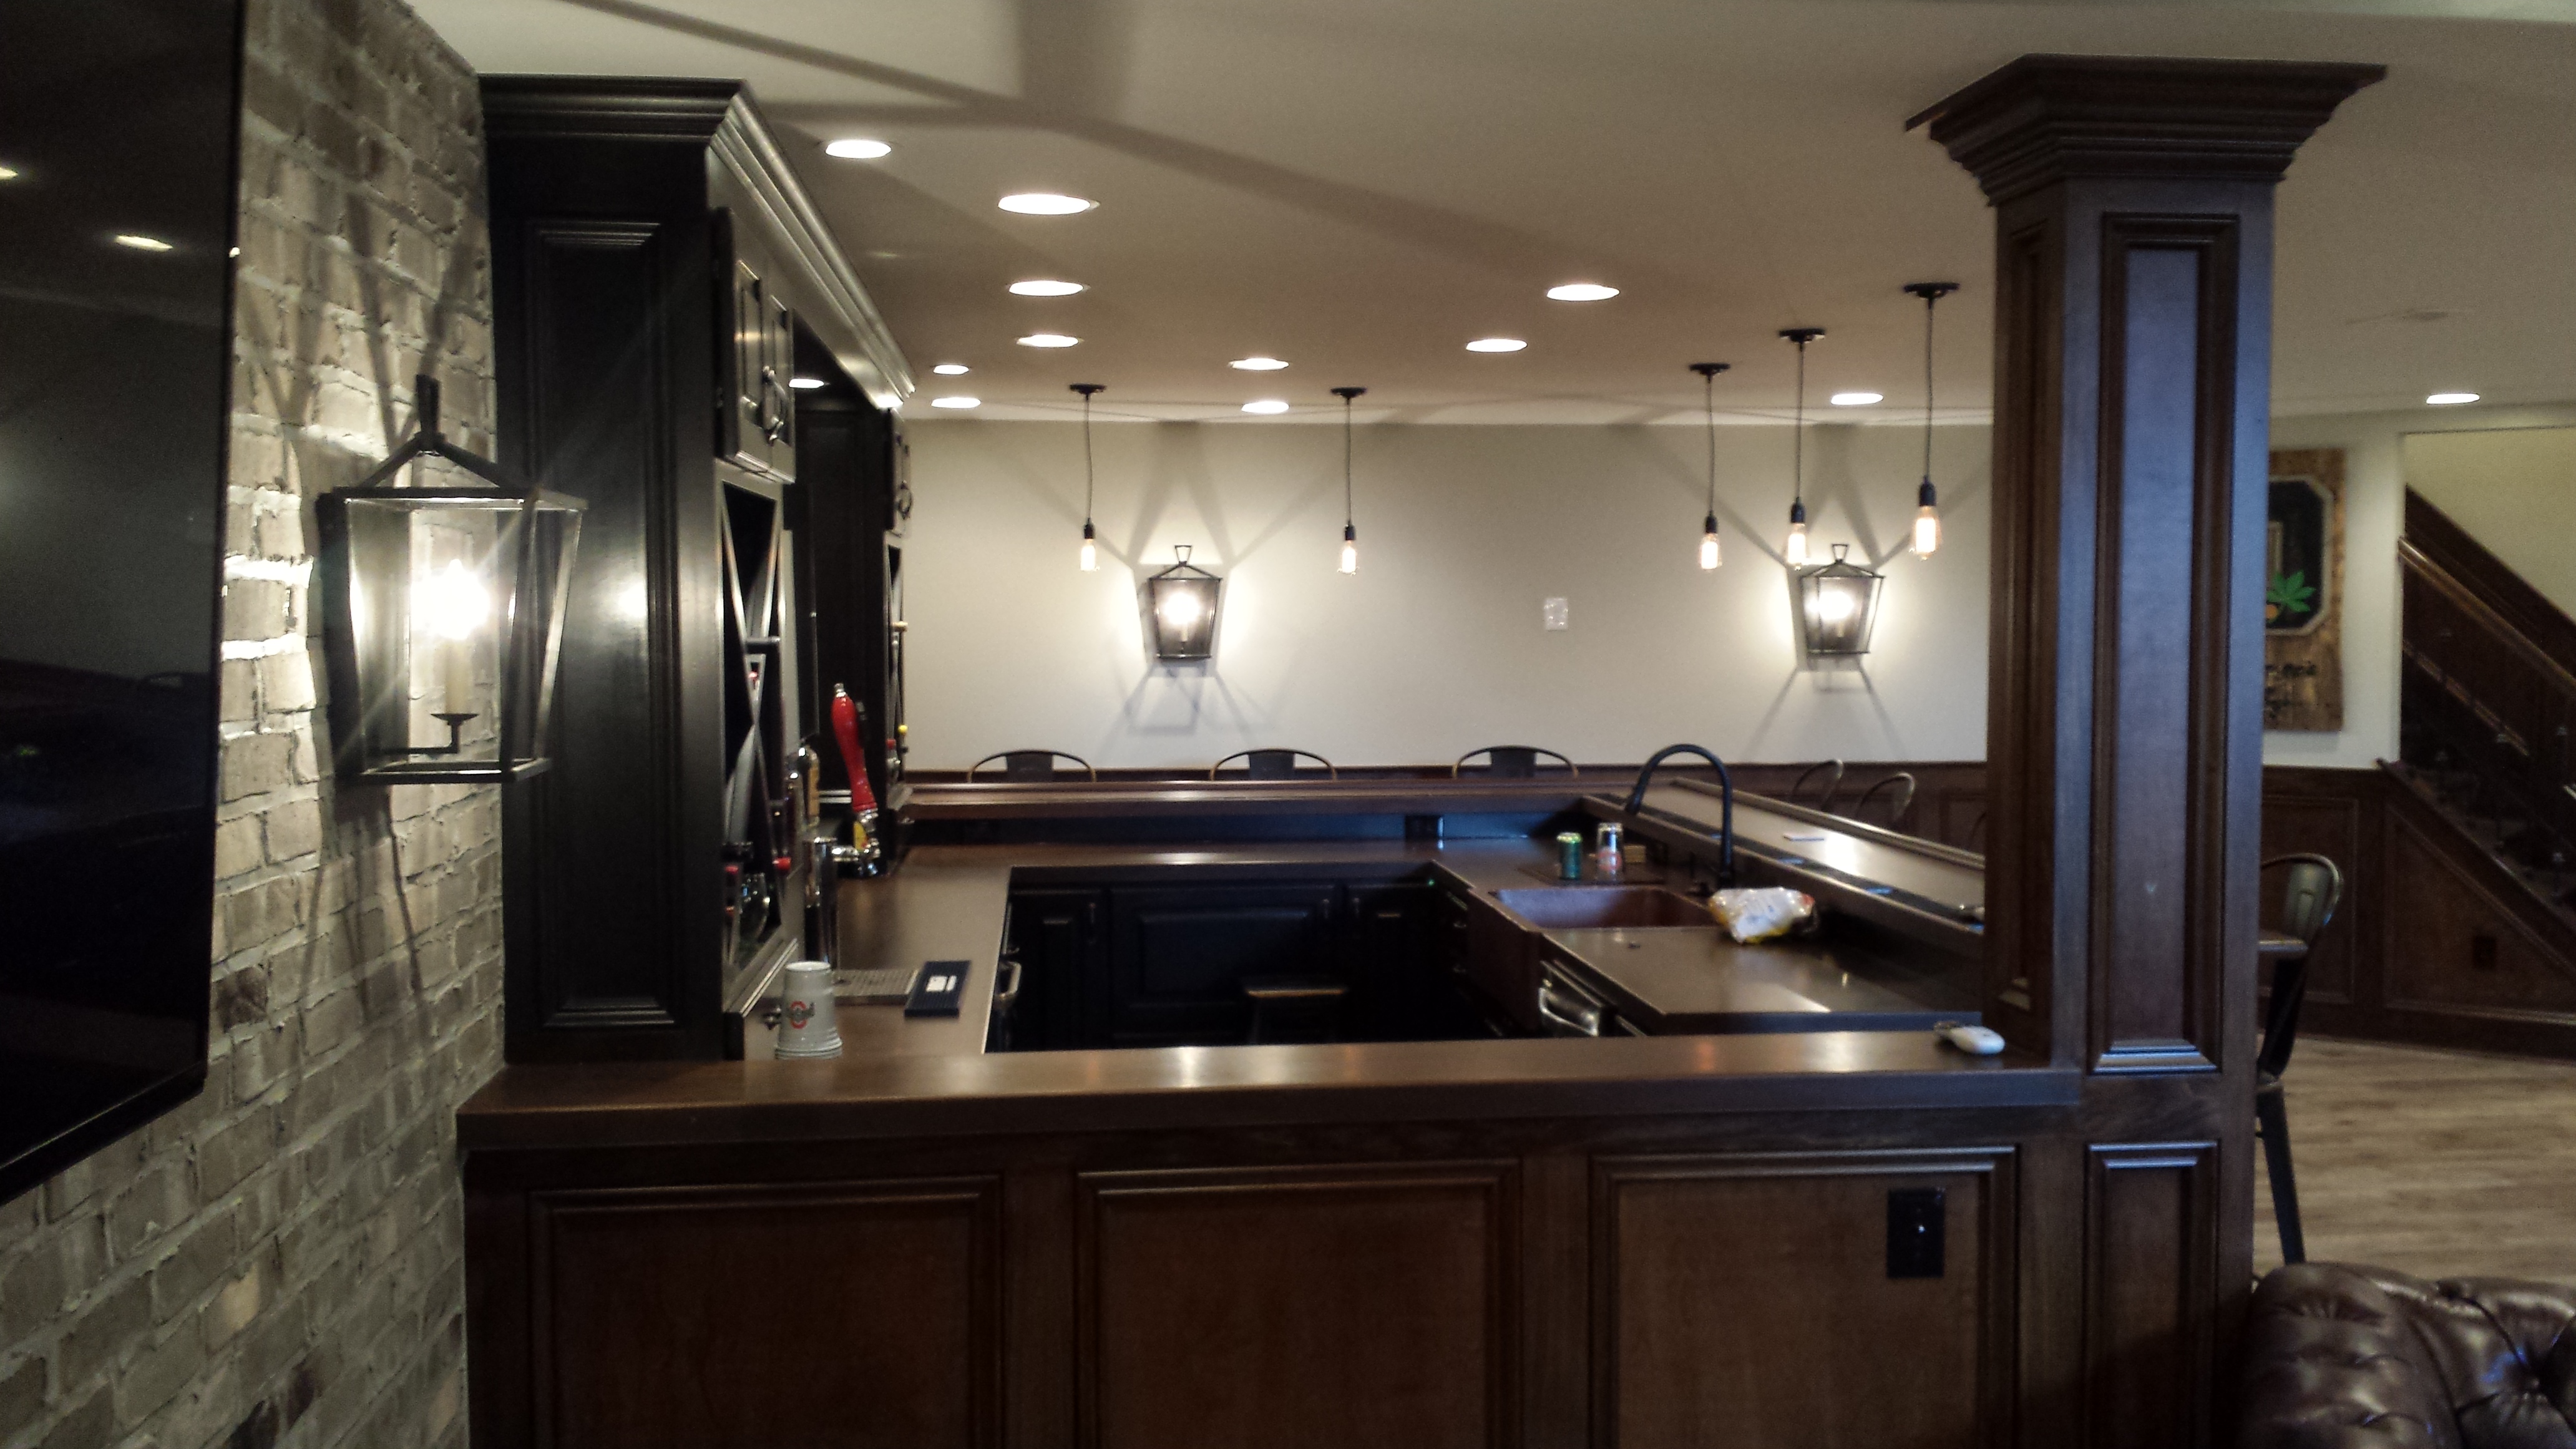 Finished Basement : Bar counter incorporated with wood pole and wainscoting